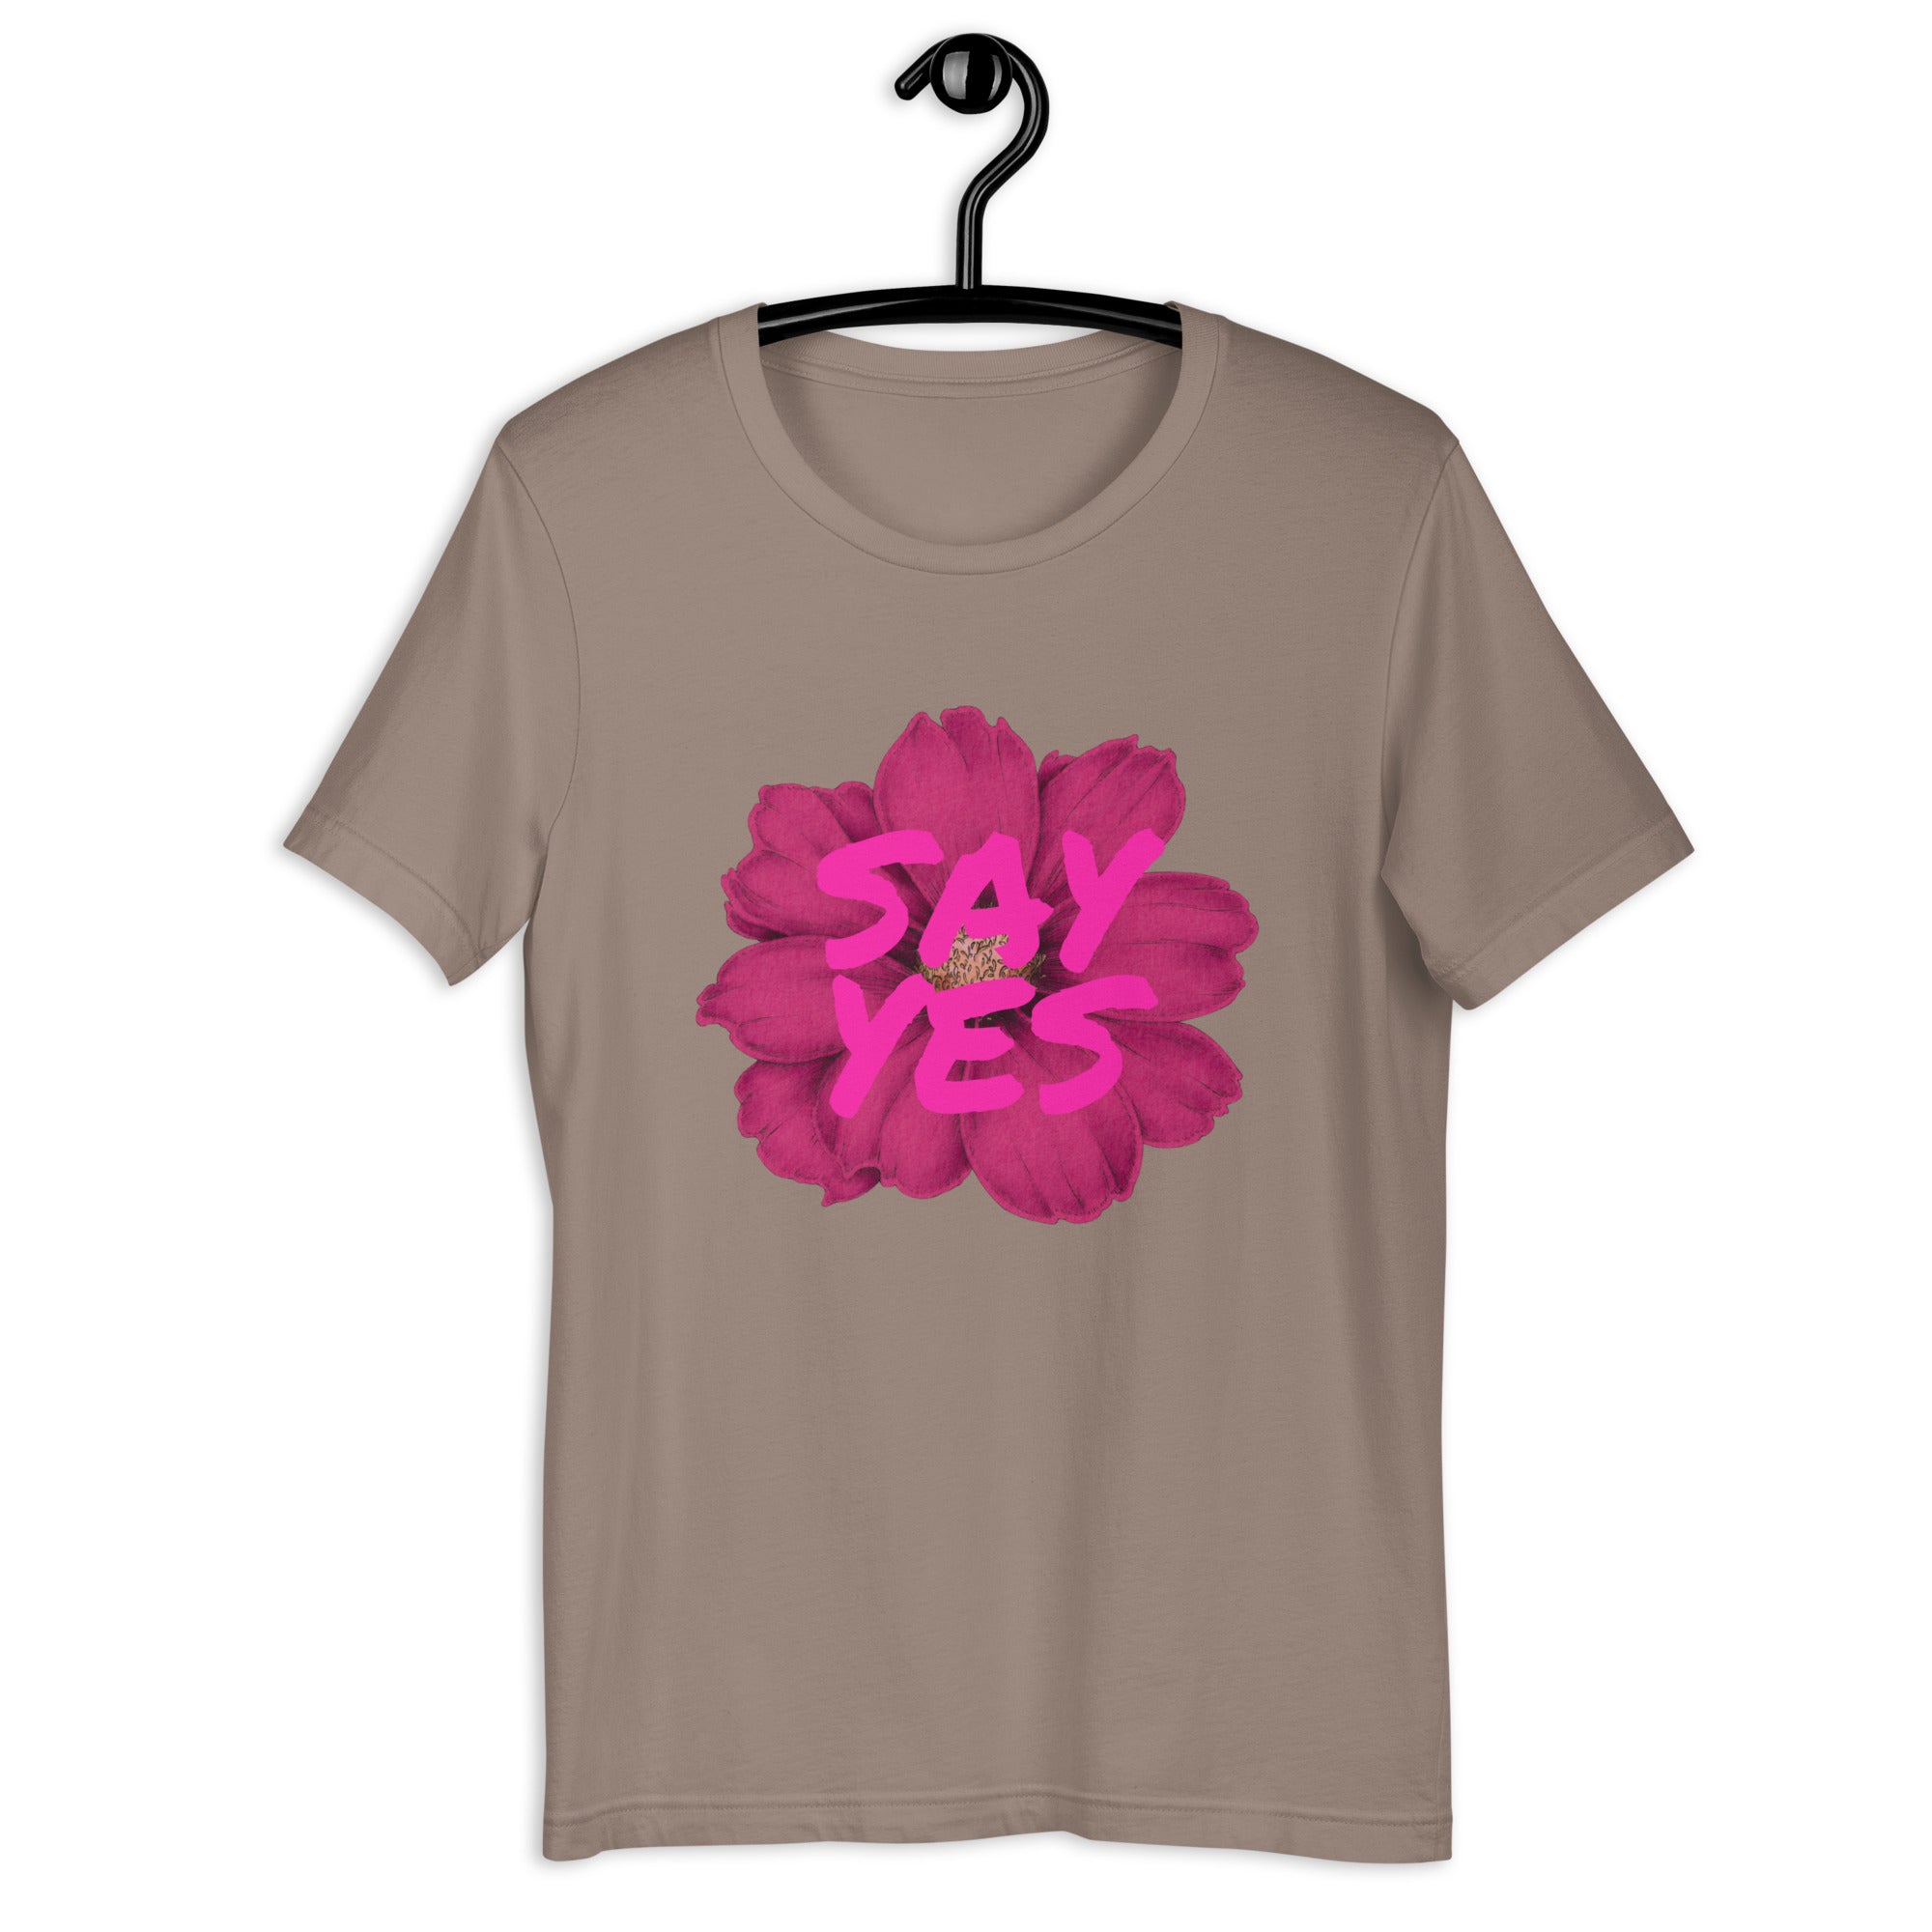 Say Yes - Plus Size Graphic Tee